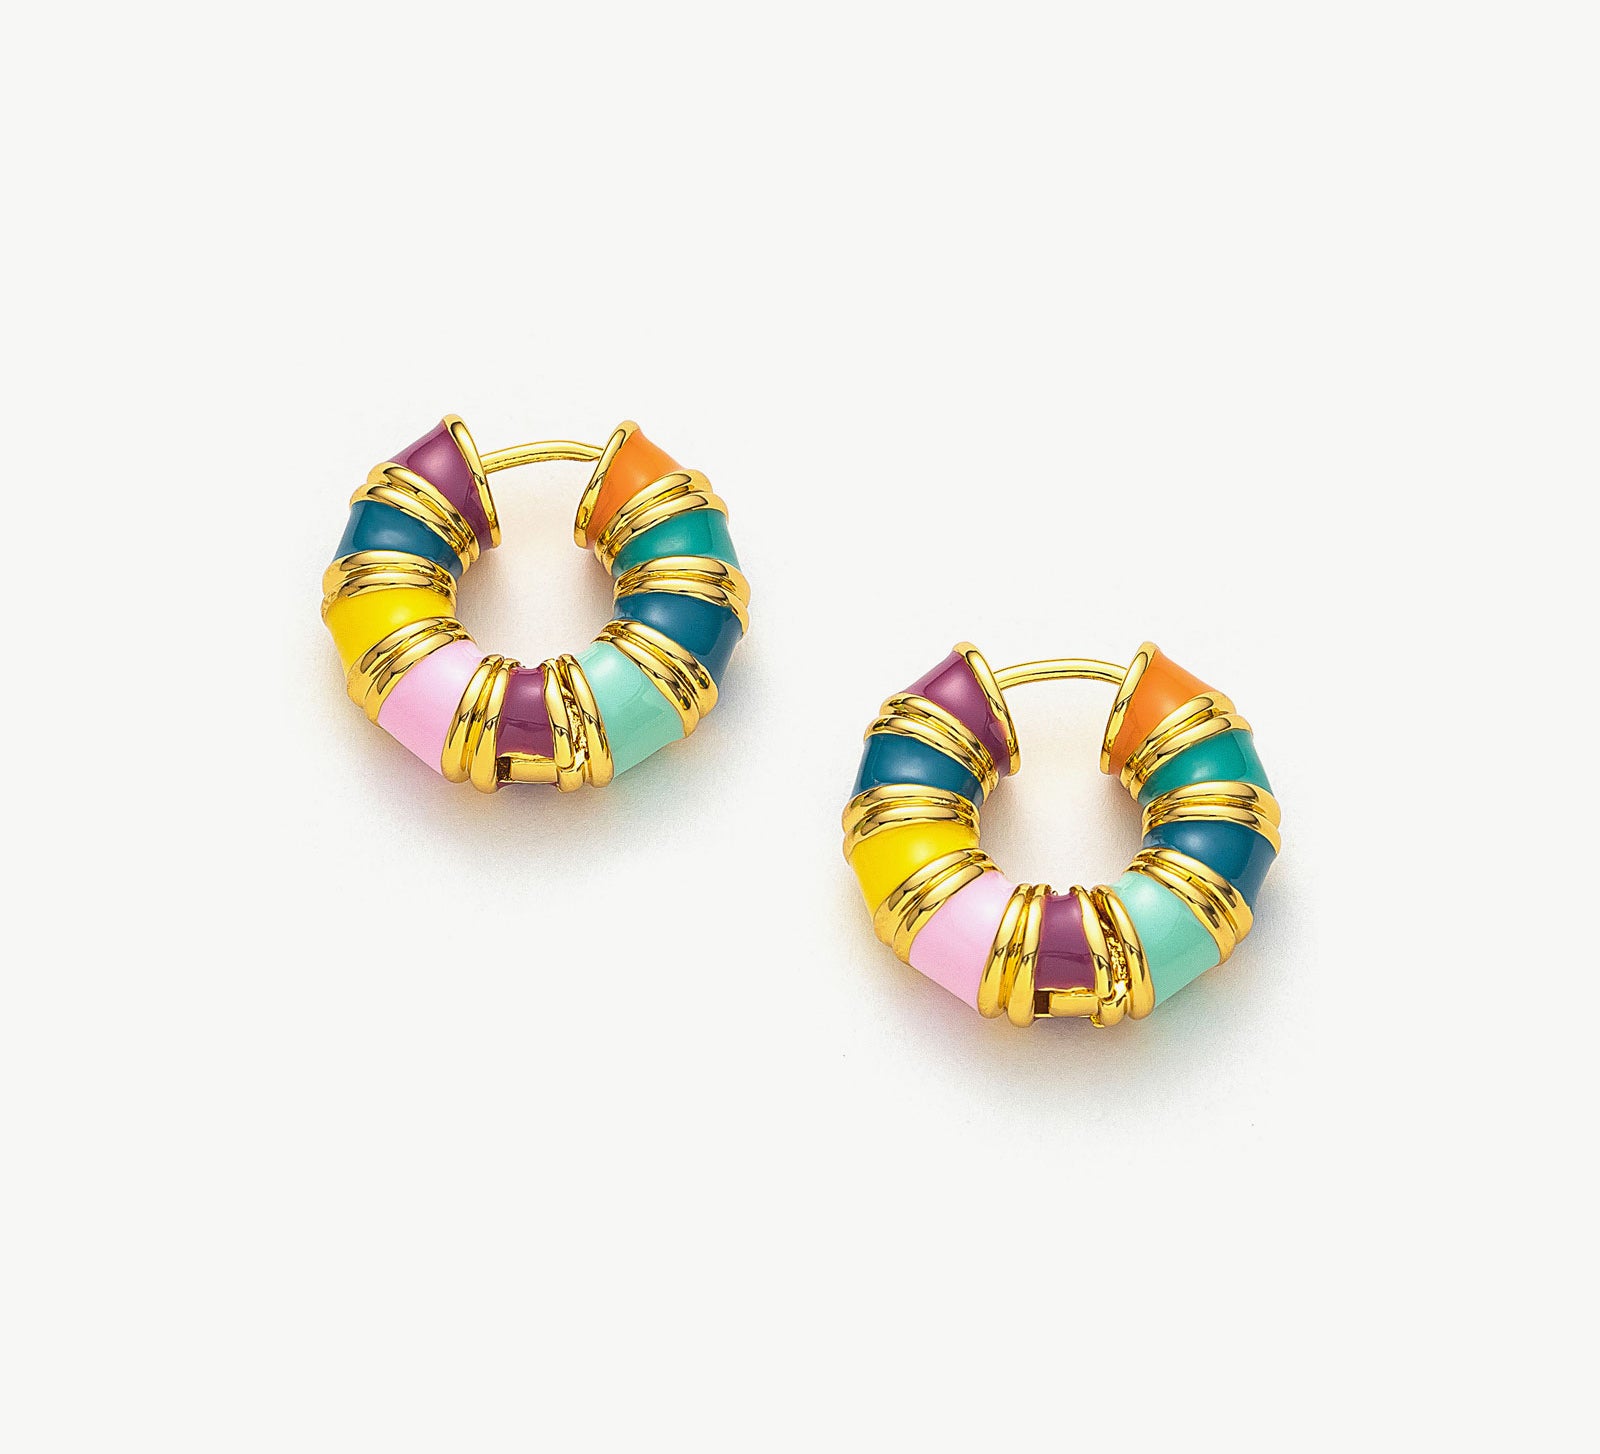 Multicolor Hoop Earrings, a lively and vibrant accessory featuring a playful array of colors for a cheerful and festive look